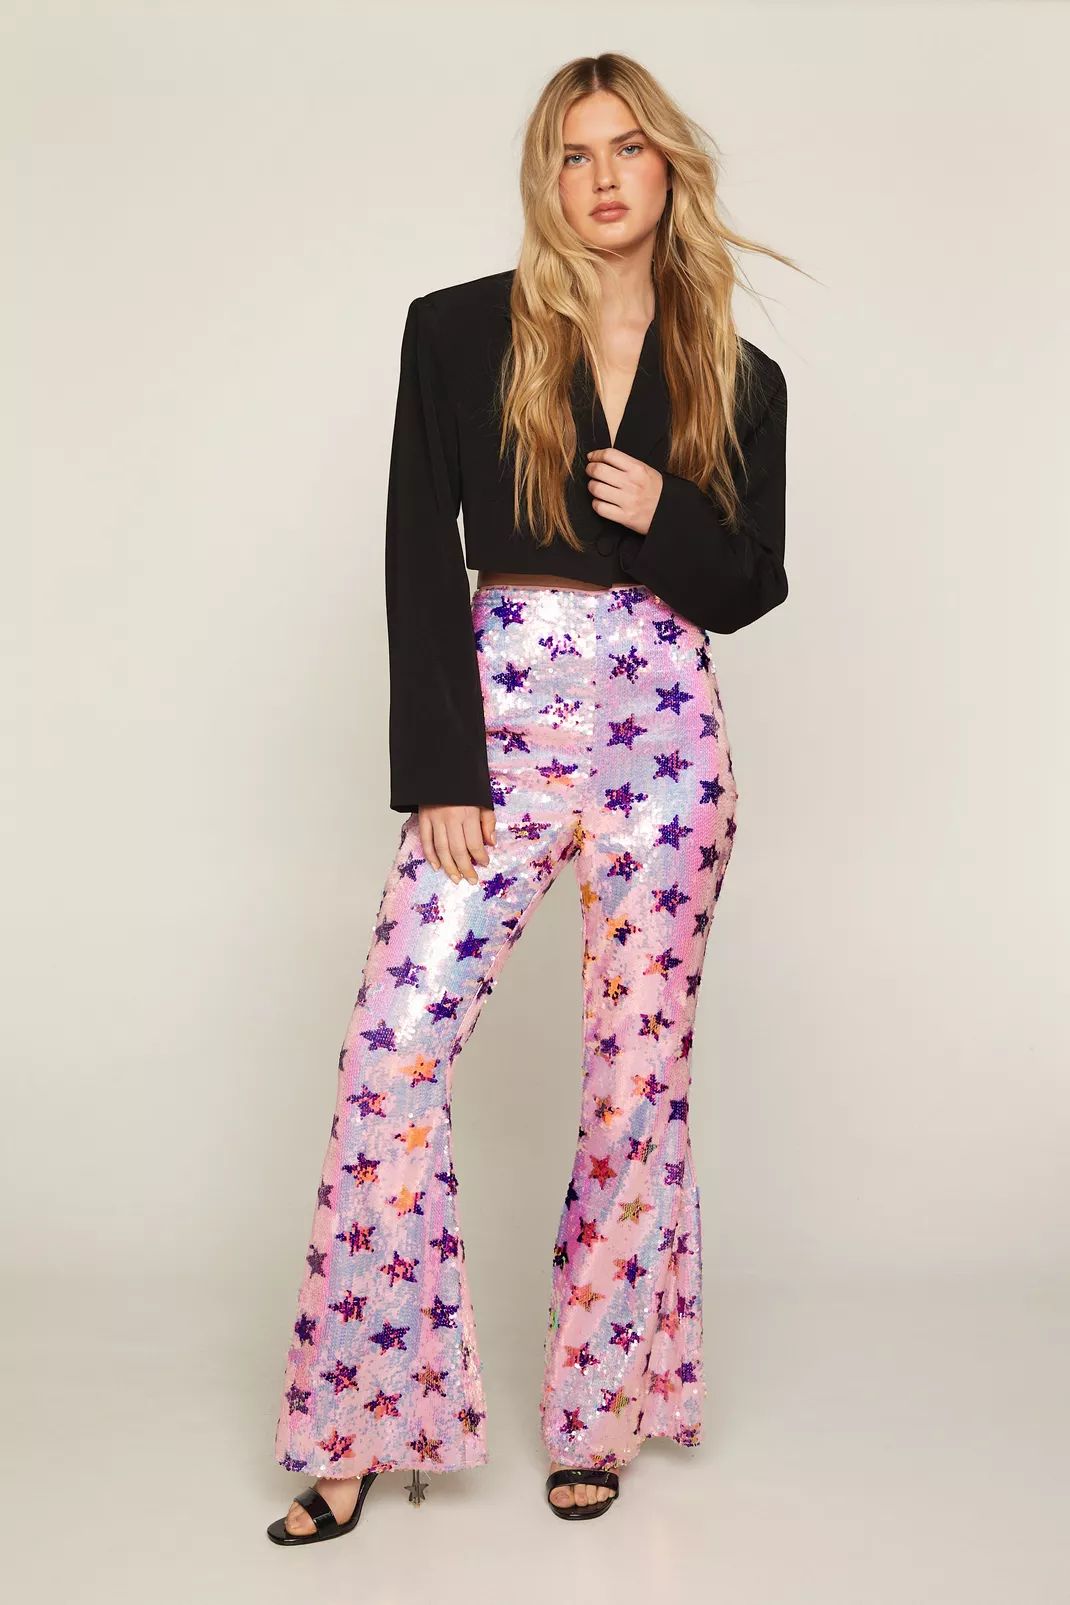 Star Sequin Flare Pants | Nasty Gal US